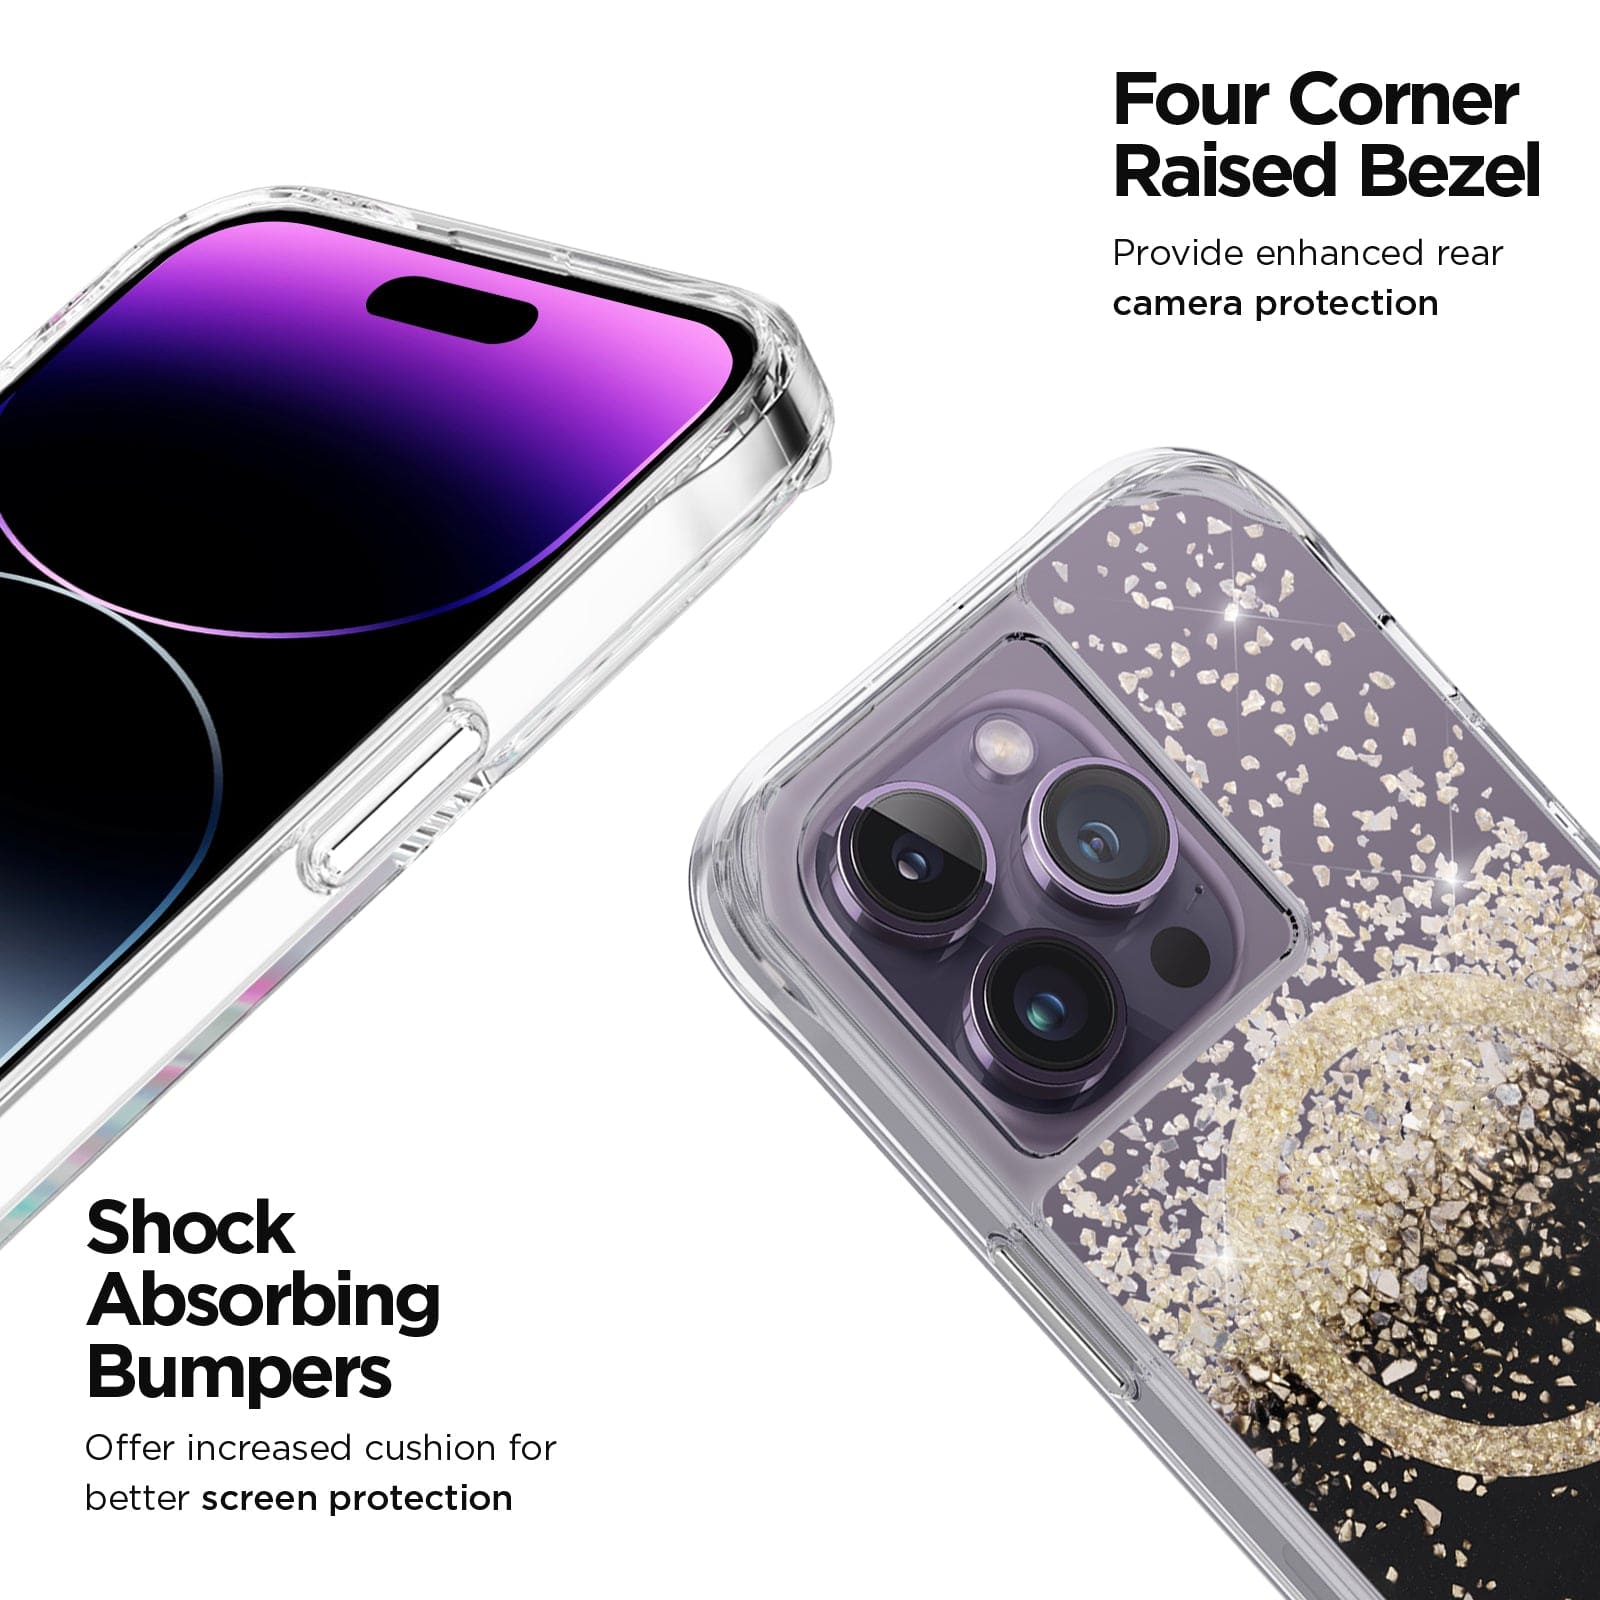 FOUR CORNER RAISED BEZEL. PROVIDE ENHANCED REAR CAMERA PROTECTION. SHOCK ABSORBING BUMPERS. OFFER INCREASED CUSHION FOR BETTER SCREEN PROTECTION. 